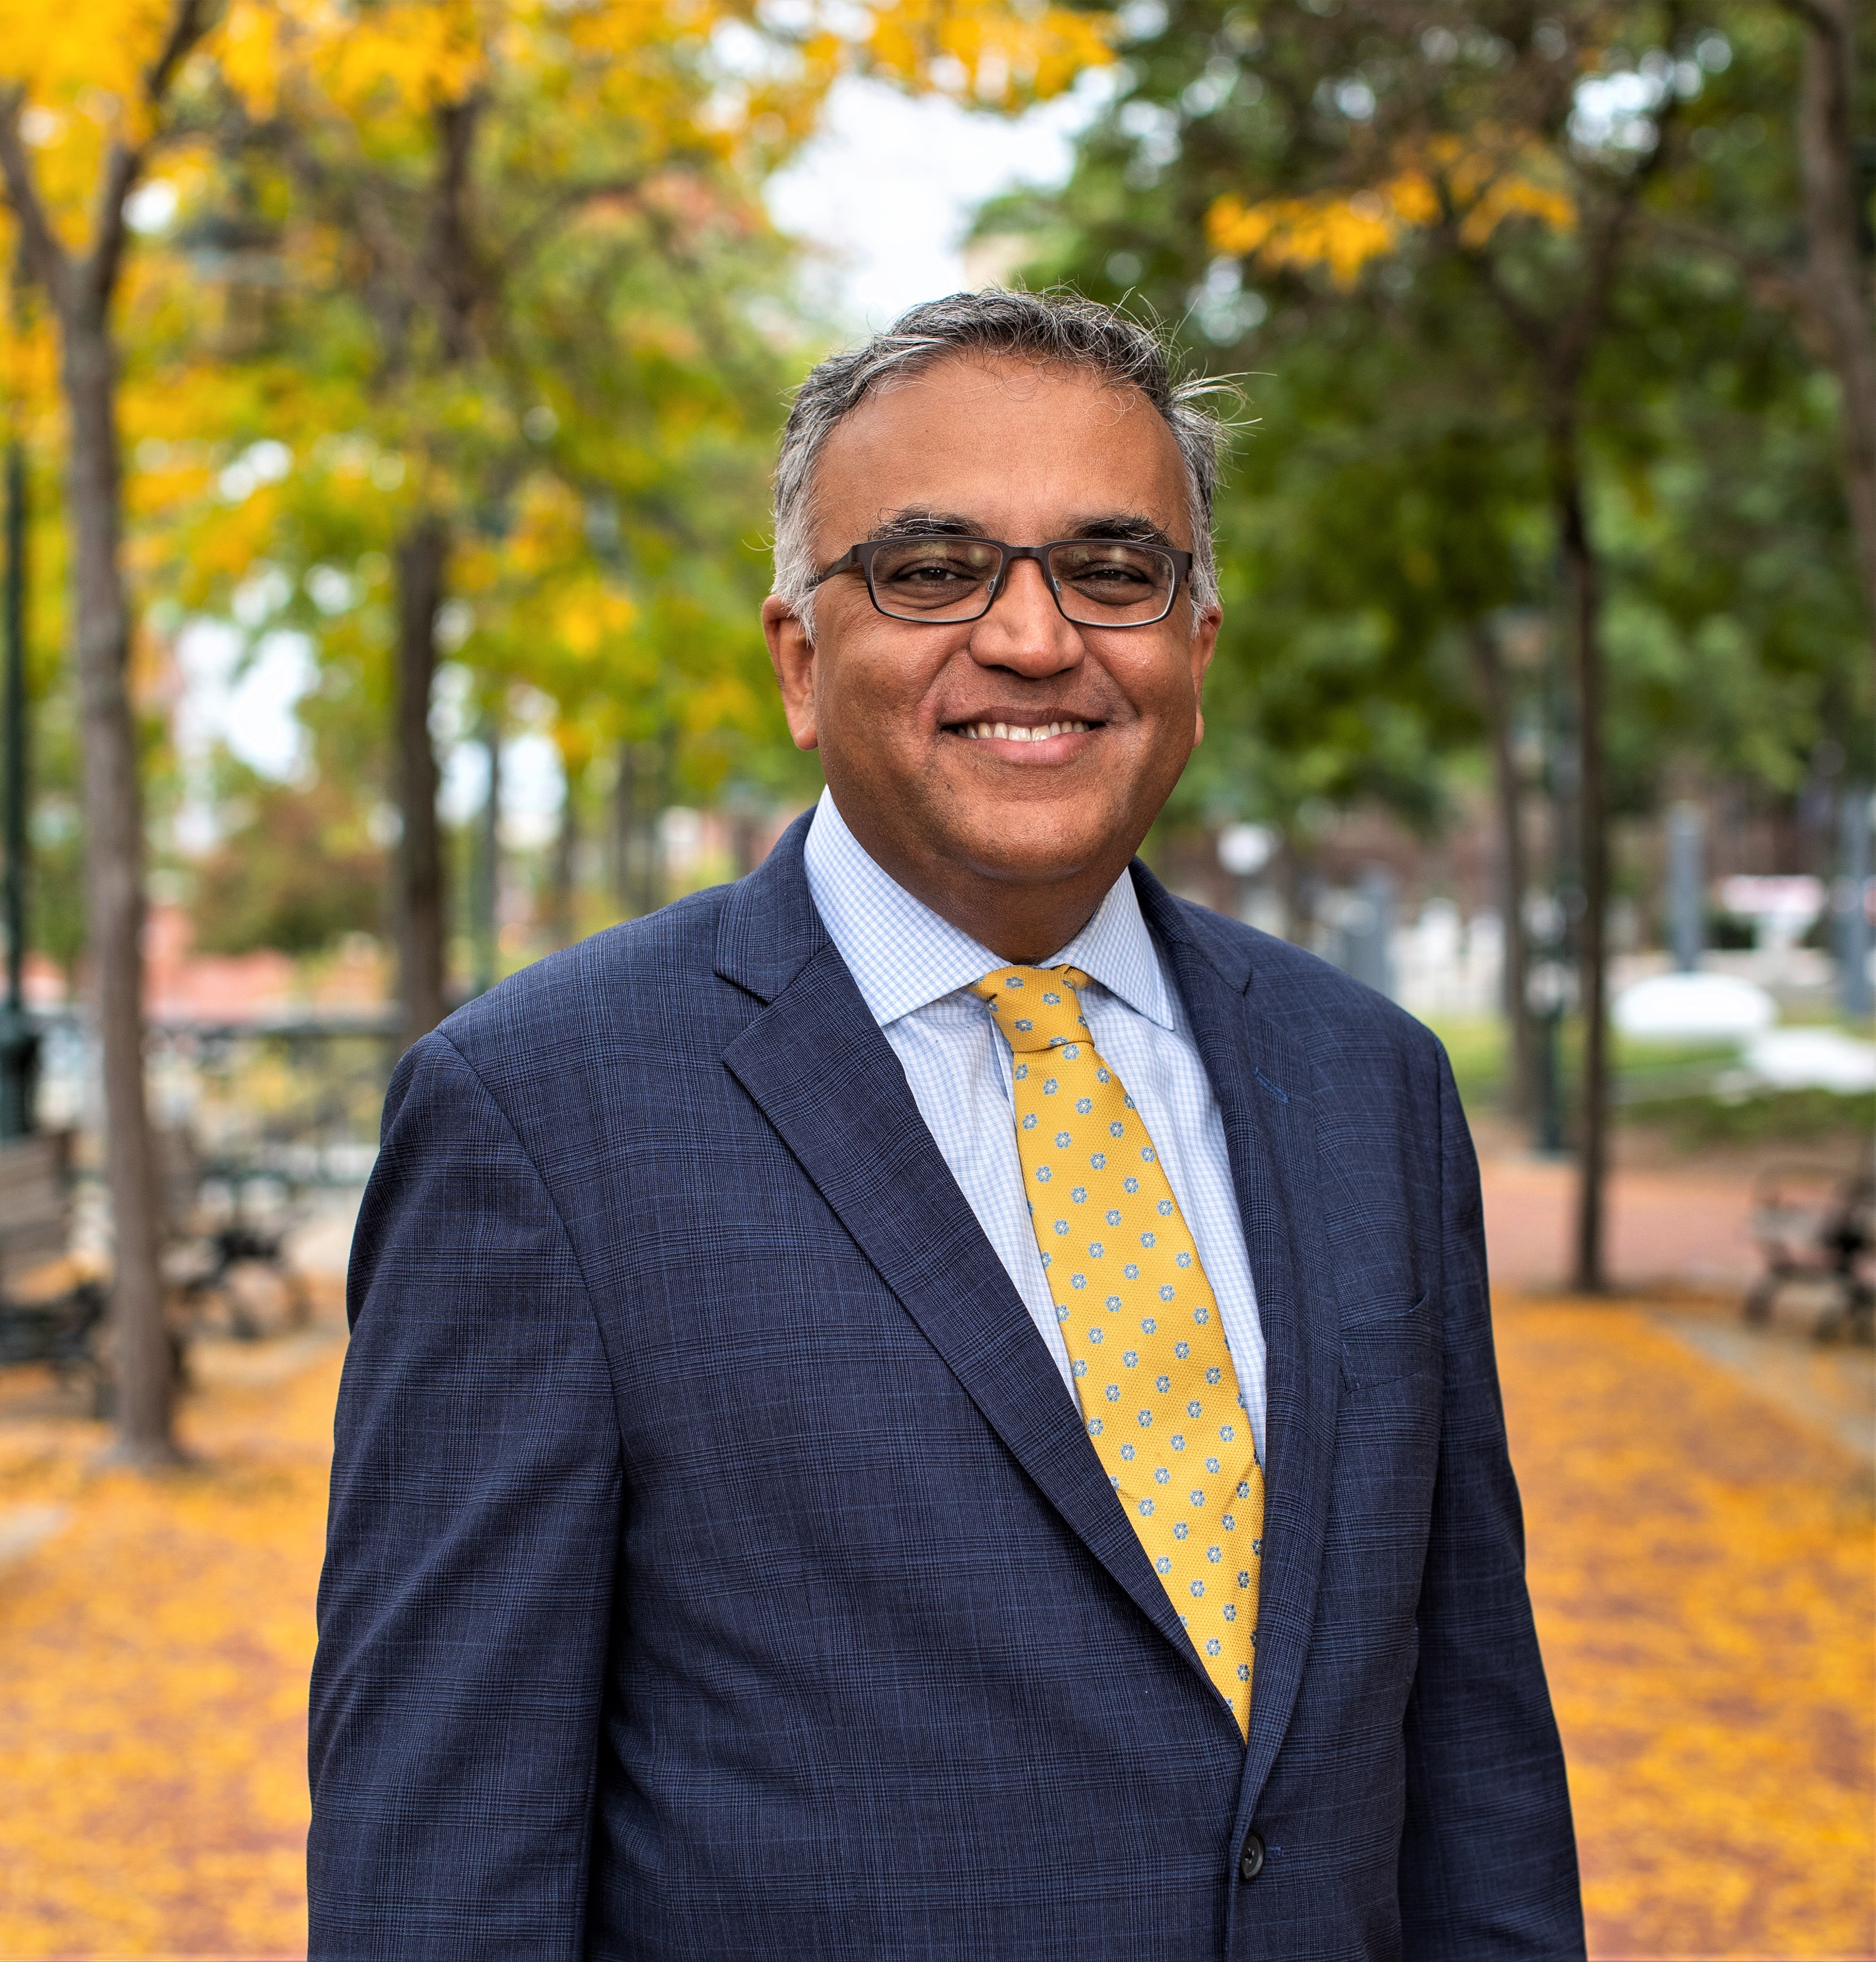 Welcome to Episode 37 of “COVID: What comes next,” an exclusive weekly Providence Journal/USA TODAY NETWORK podcast featuring Dr. Ashish Jha, dean of the Brown University School of Public Health and an internationally respected expert on pandemic response and preparedness